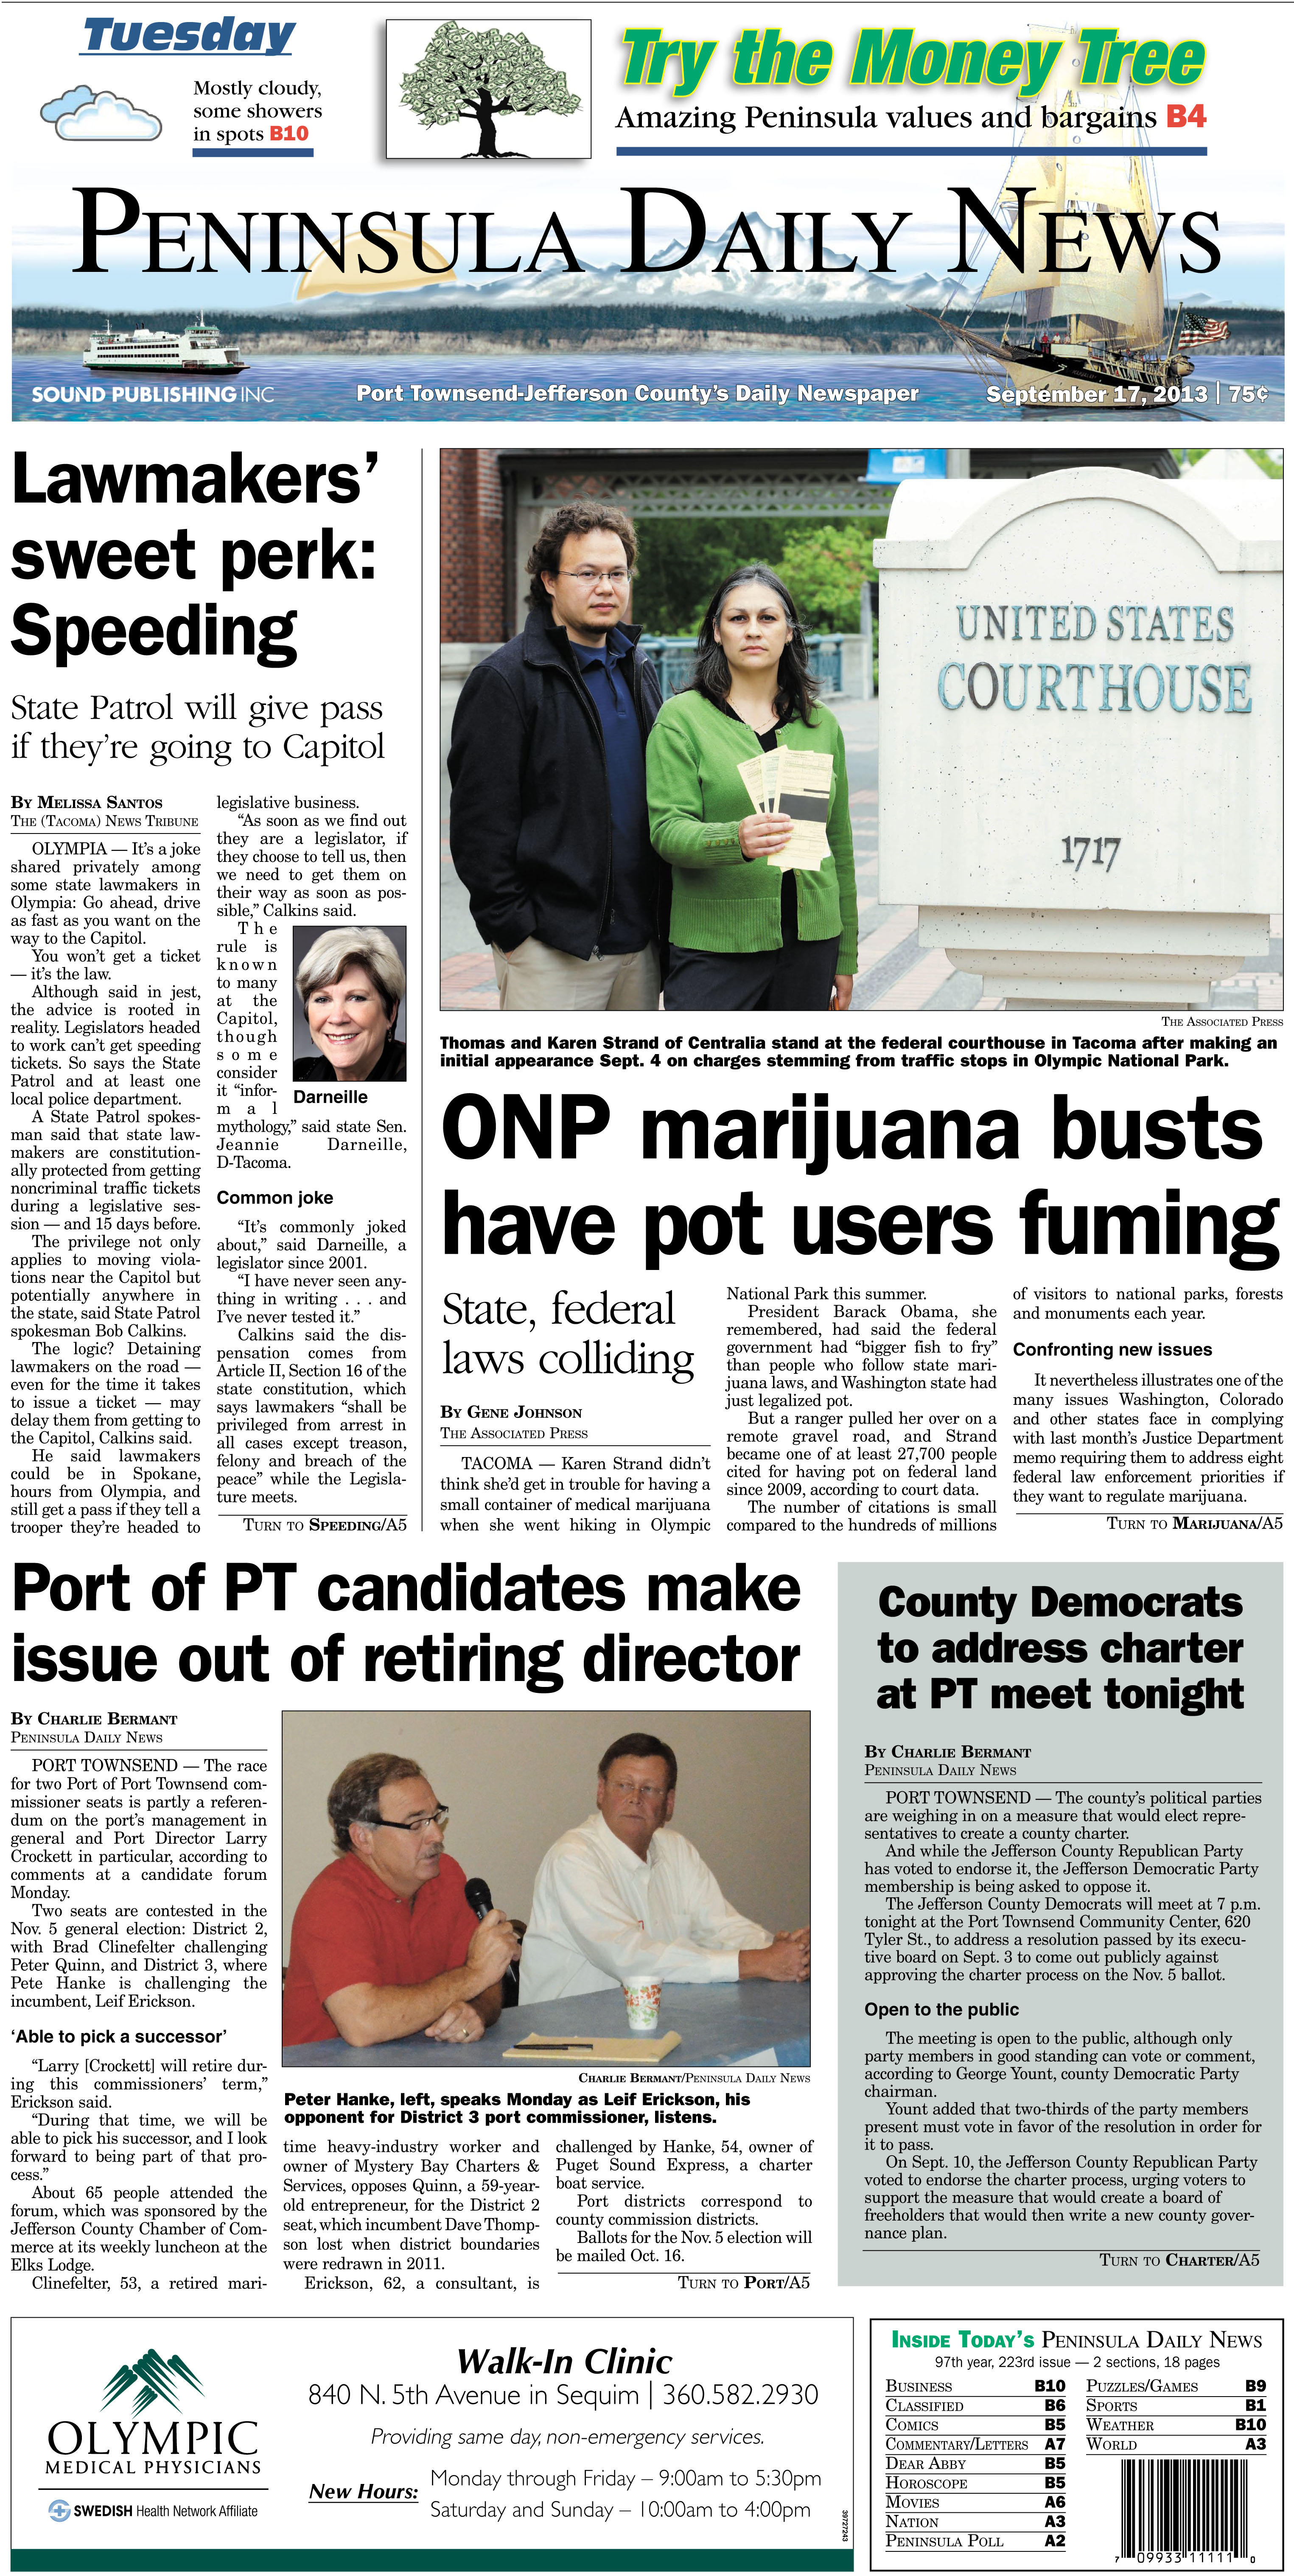 Tuesday's Page 1 for our Jefferson County readers. (Click on image to enlarge)